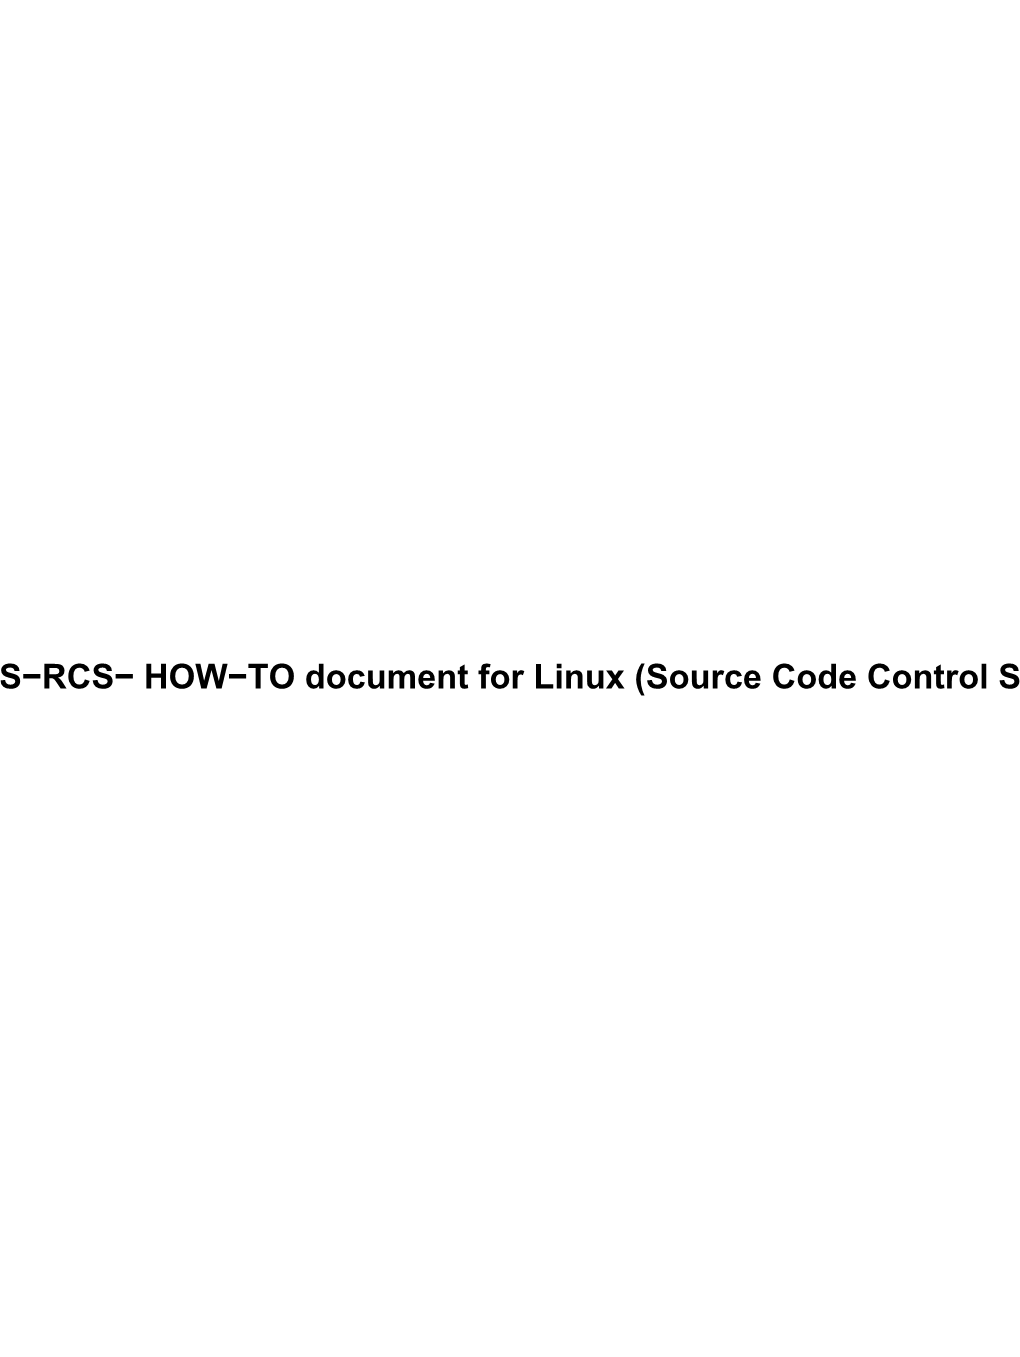 CVS-RCS- HOW-TO Document for Linux (Source Code Control System)